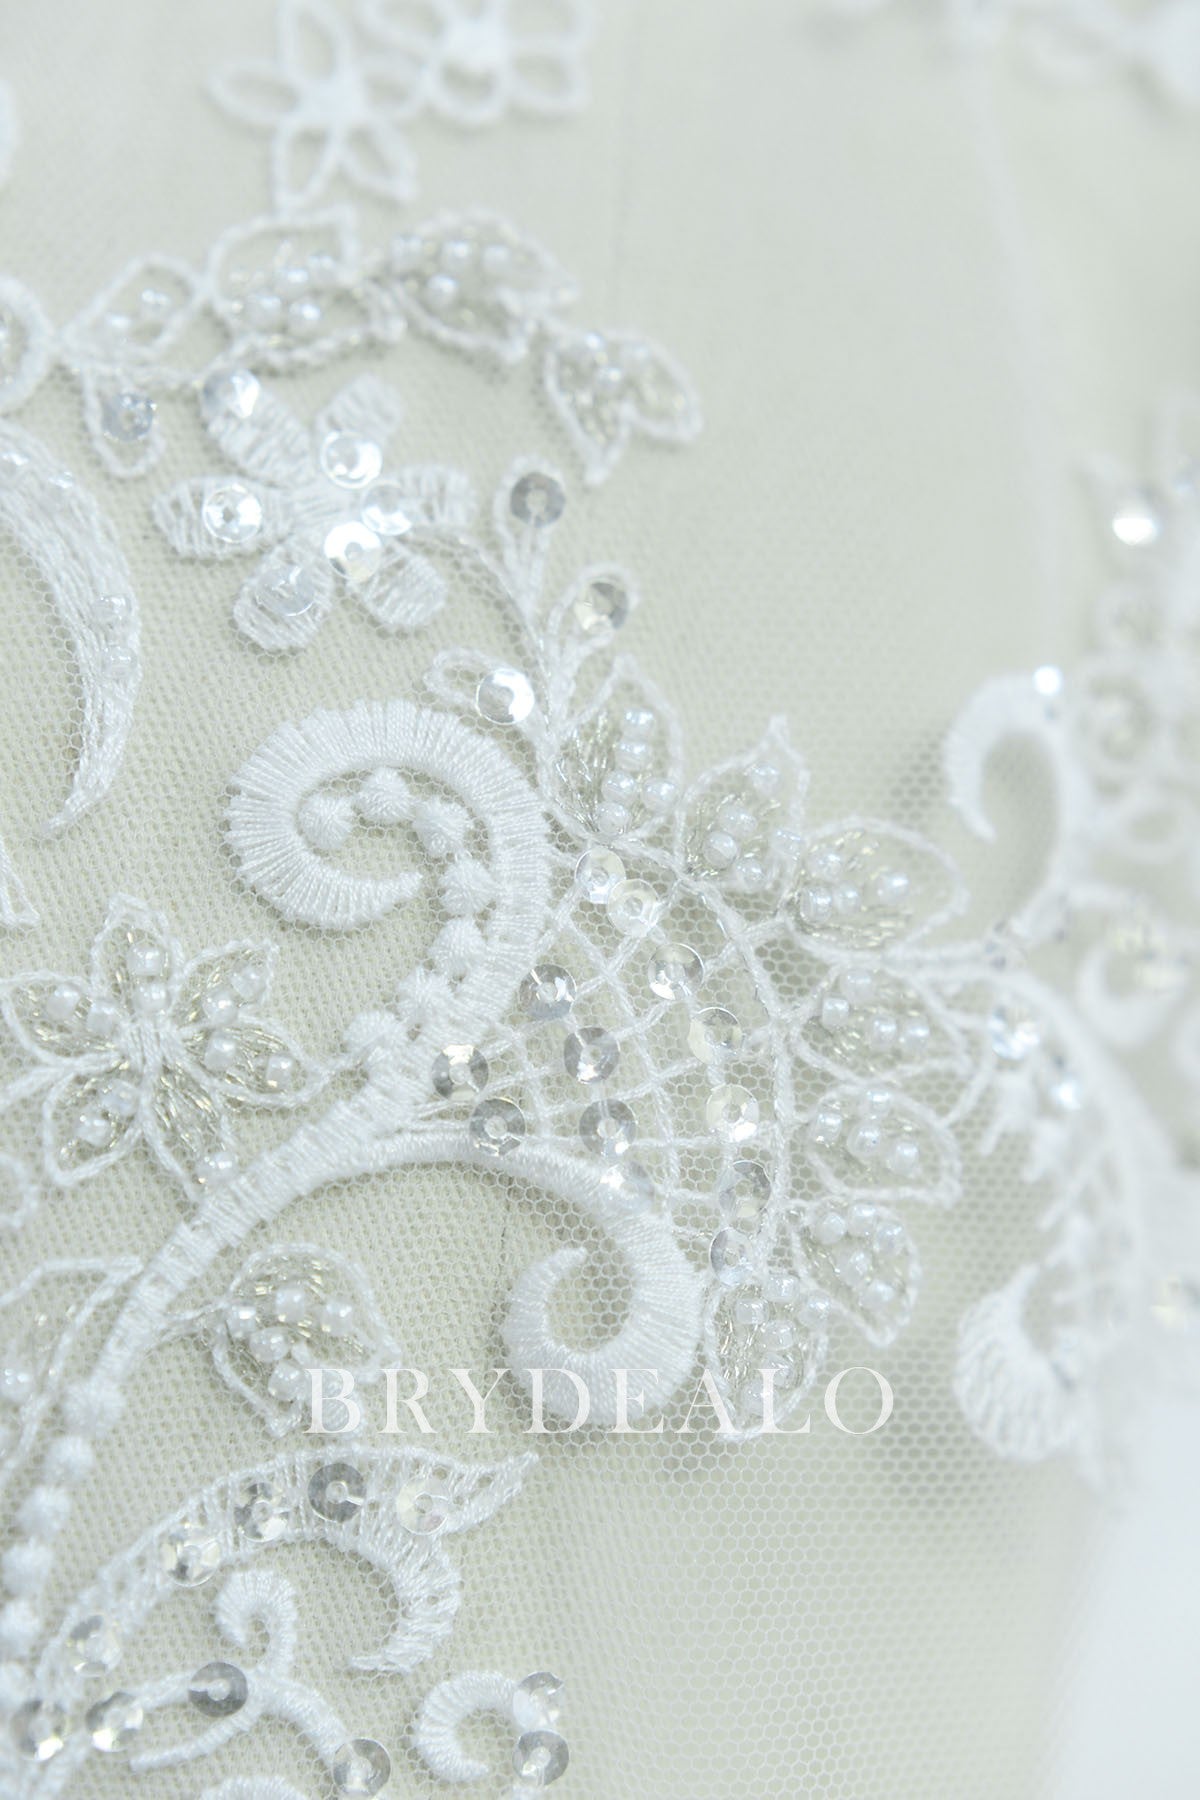 Beaded Unrestrained Embroidered Lace Fabric_Brydealo